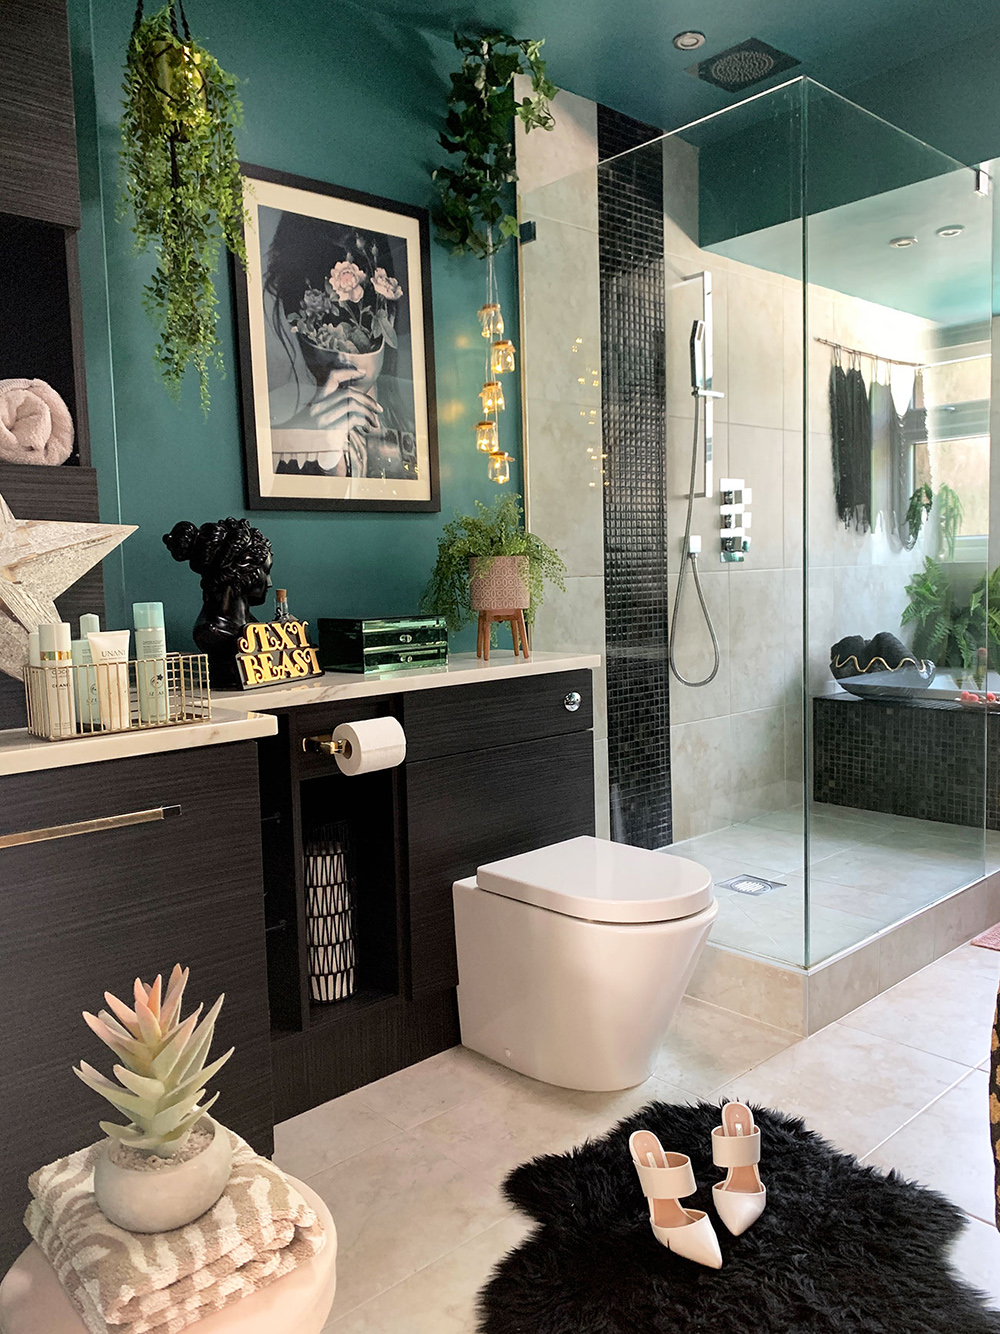 Quirky bathroom decor. Green and black colour palette with lush green house plants